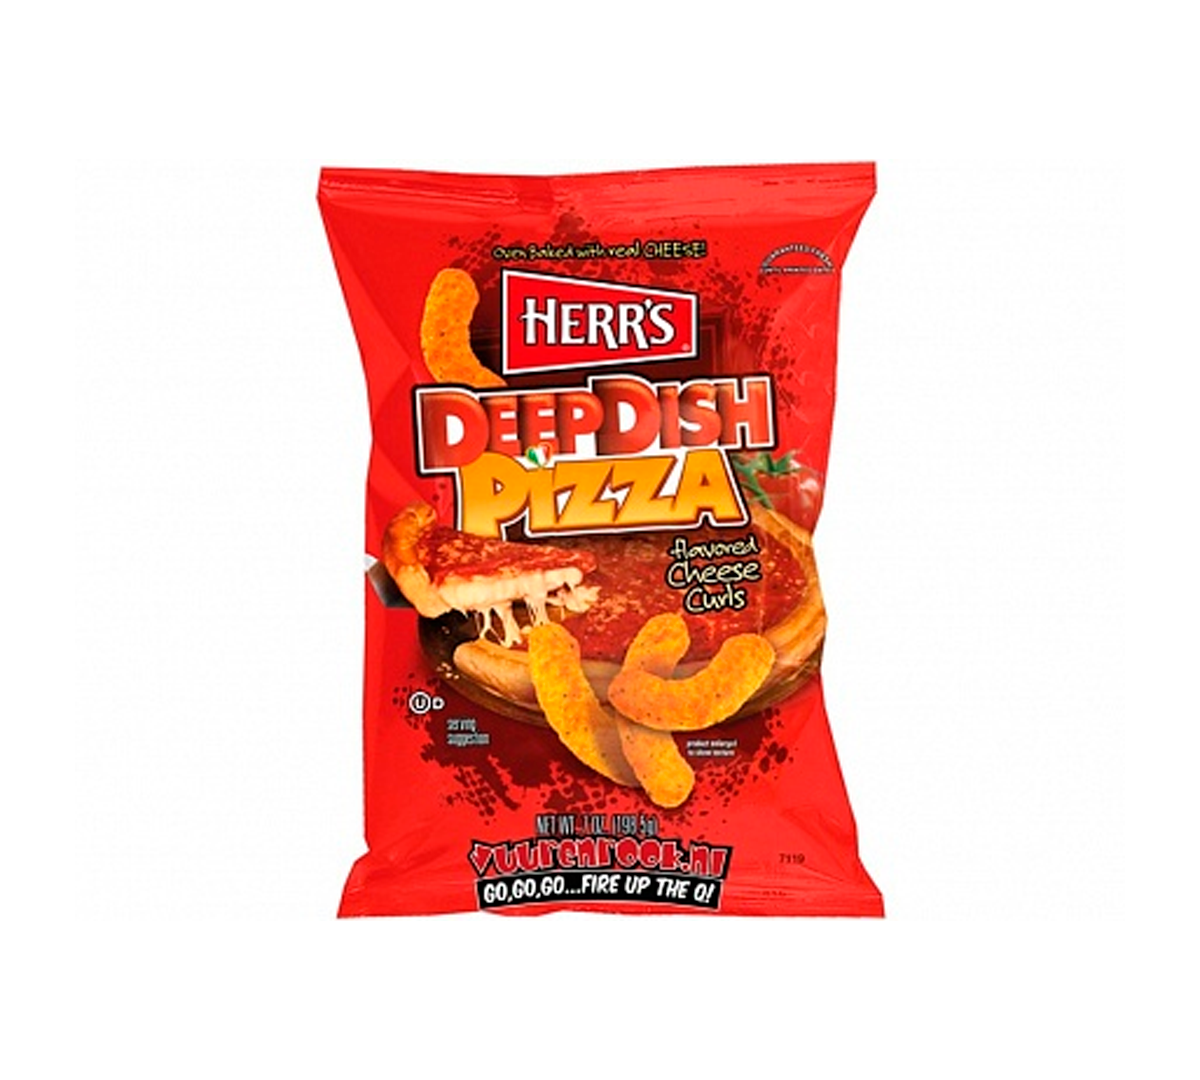 Herr's Deep Dish Pizza Cheese Curls - Patatine gusto pizza